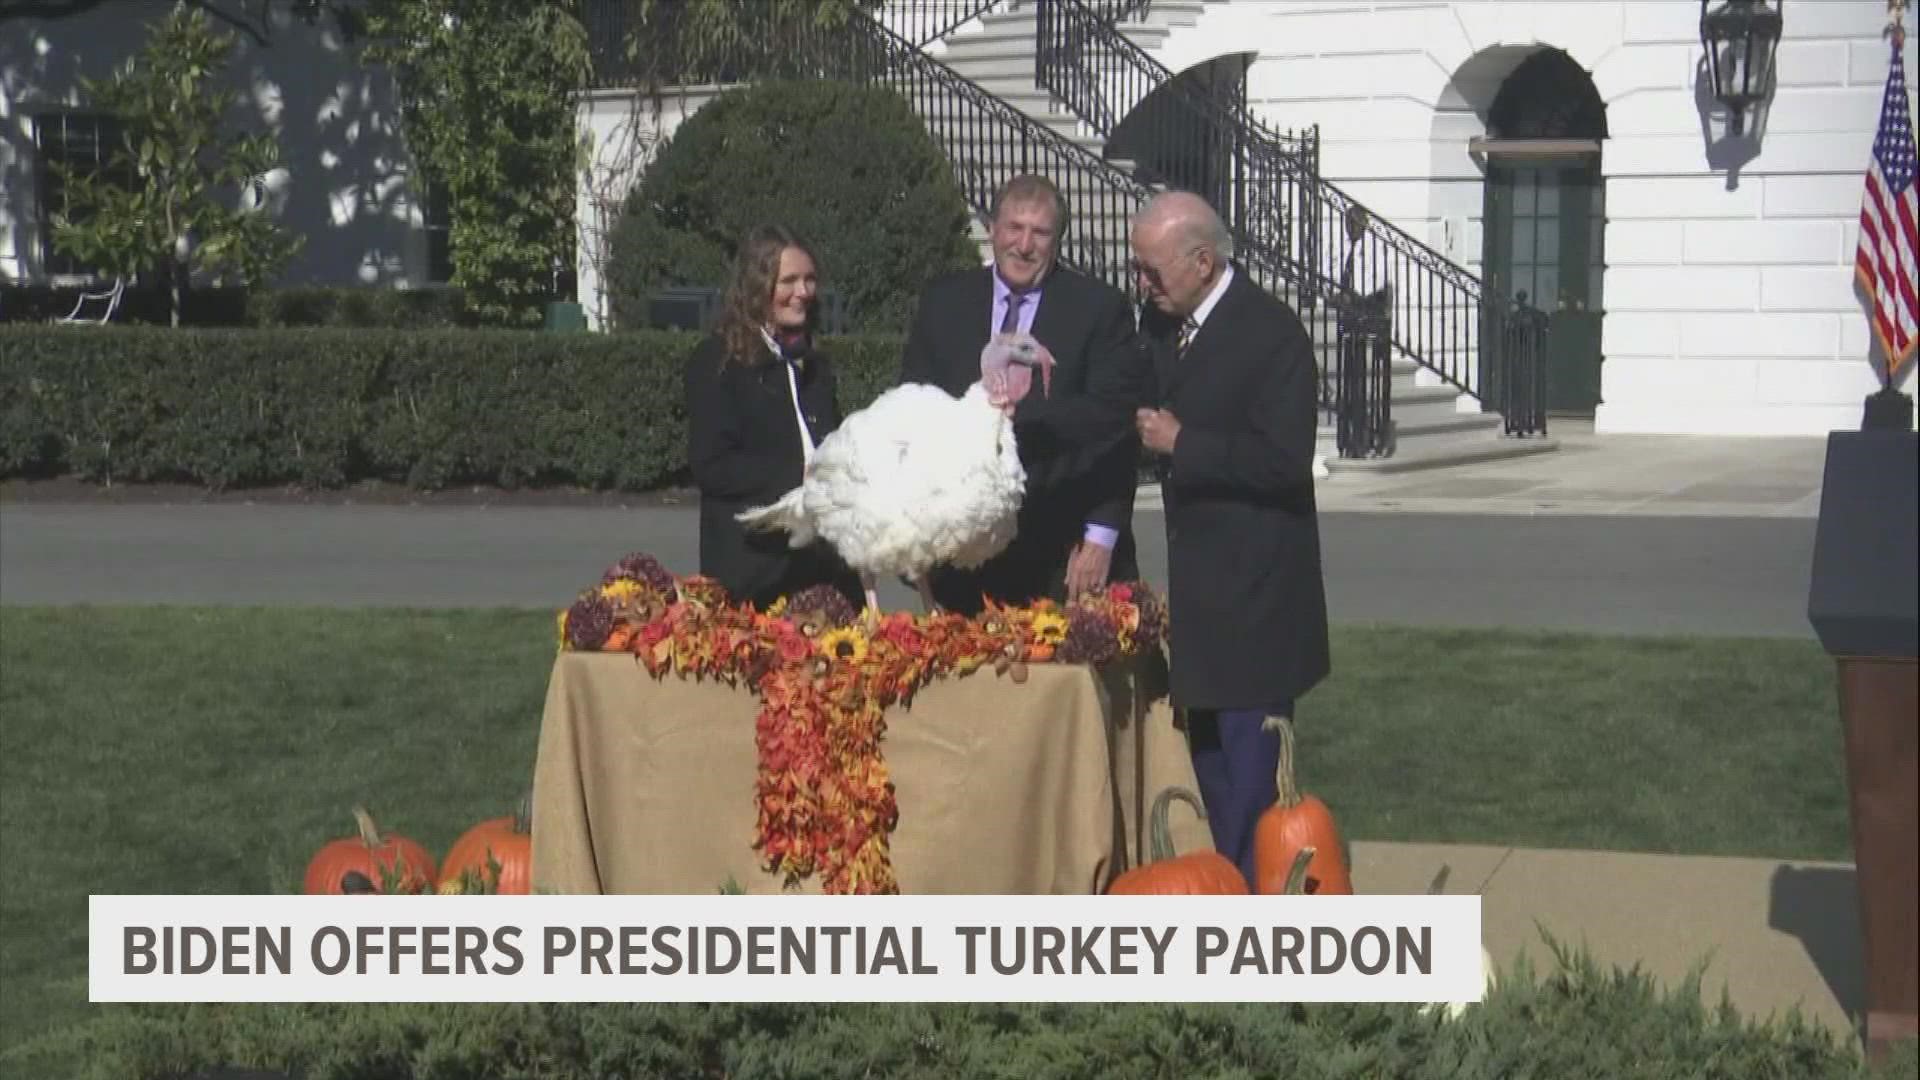 The annual White House tradition of pardoning a Thanksgiving turkey dates to 1989 and President George H.W. Bush.